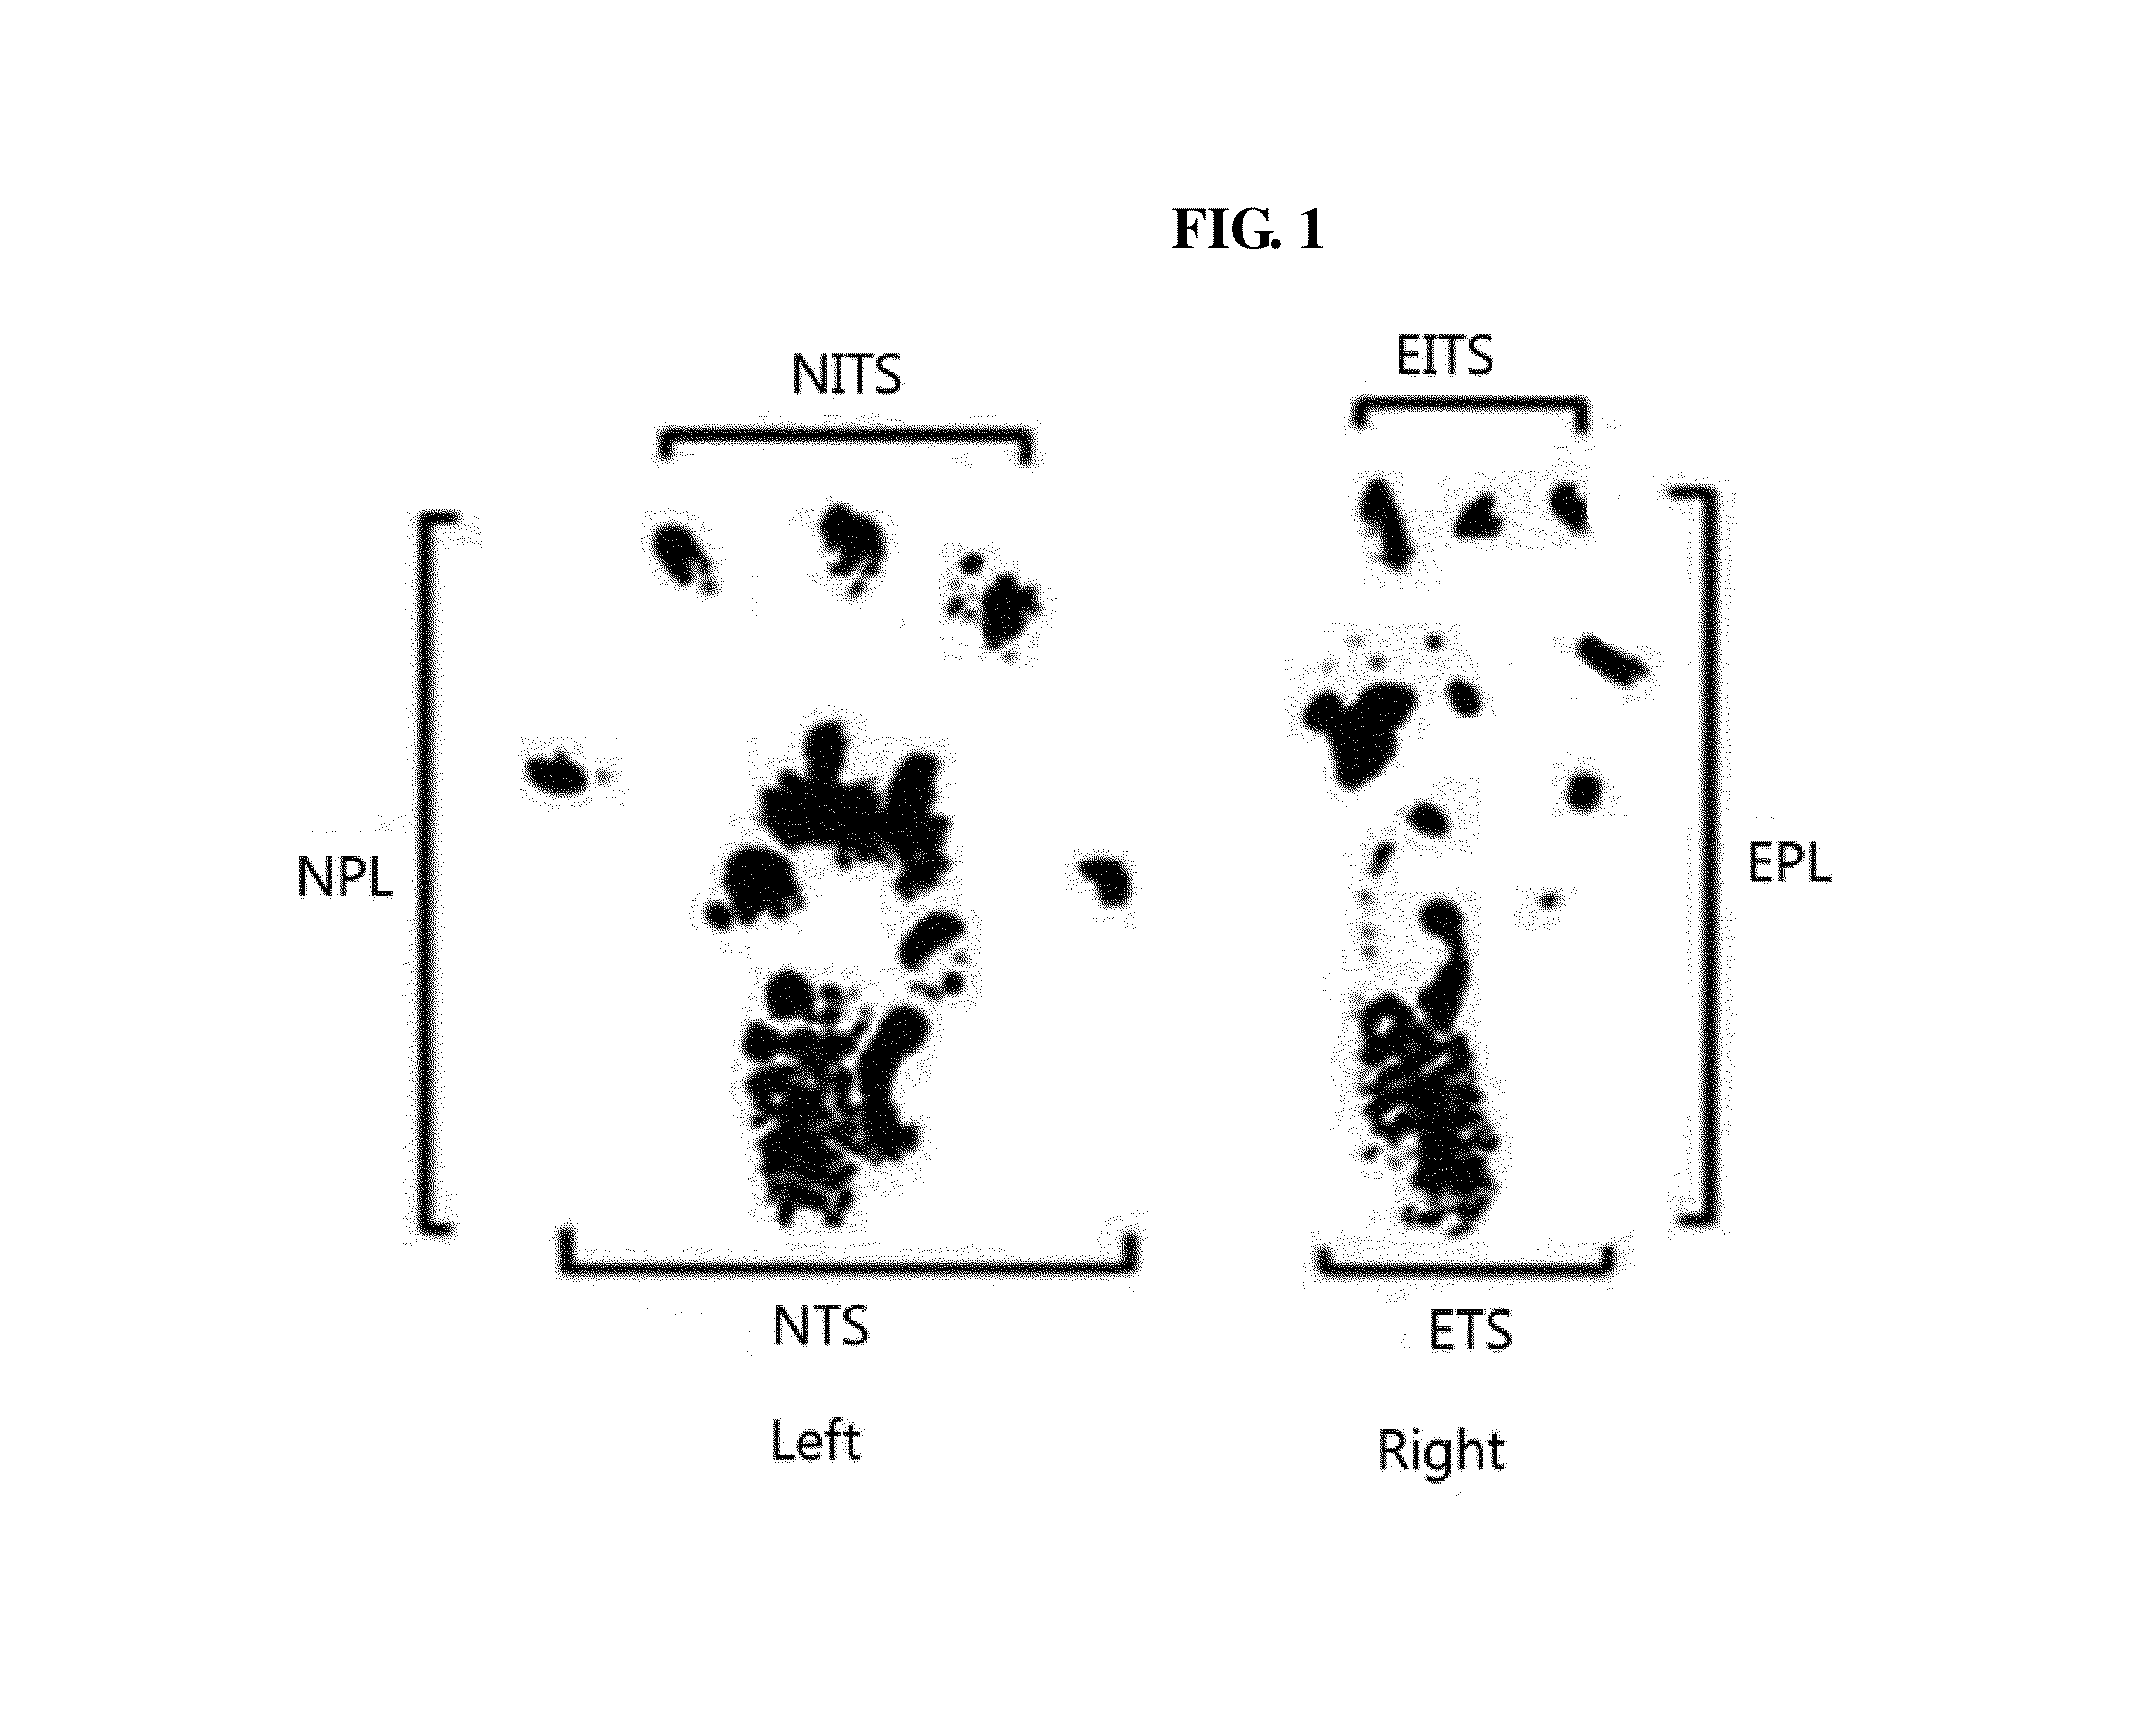 Composition comprising filler and botulinum toxin for alleviating skin wrinkles or aging or treating neuromuscular diseases